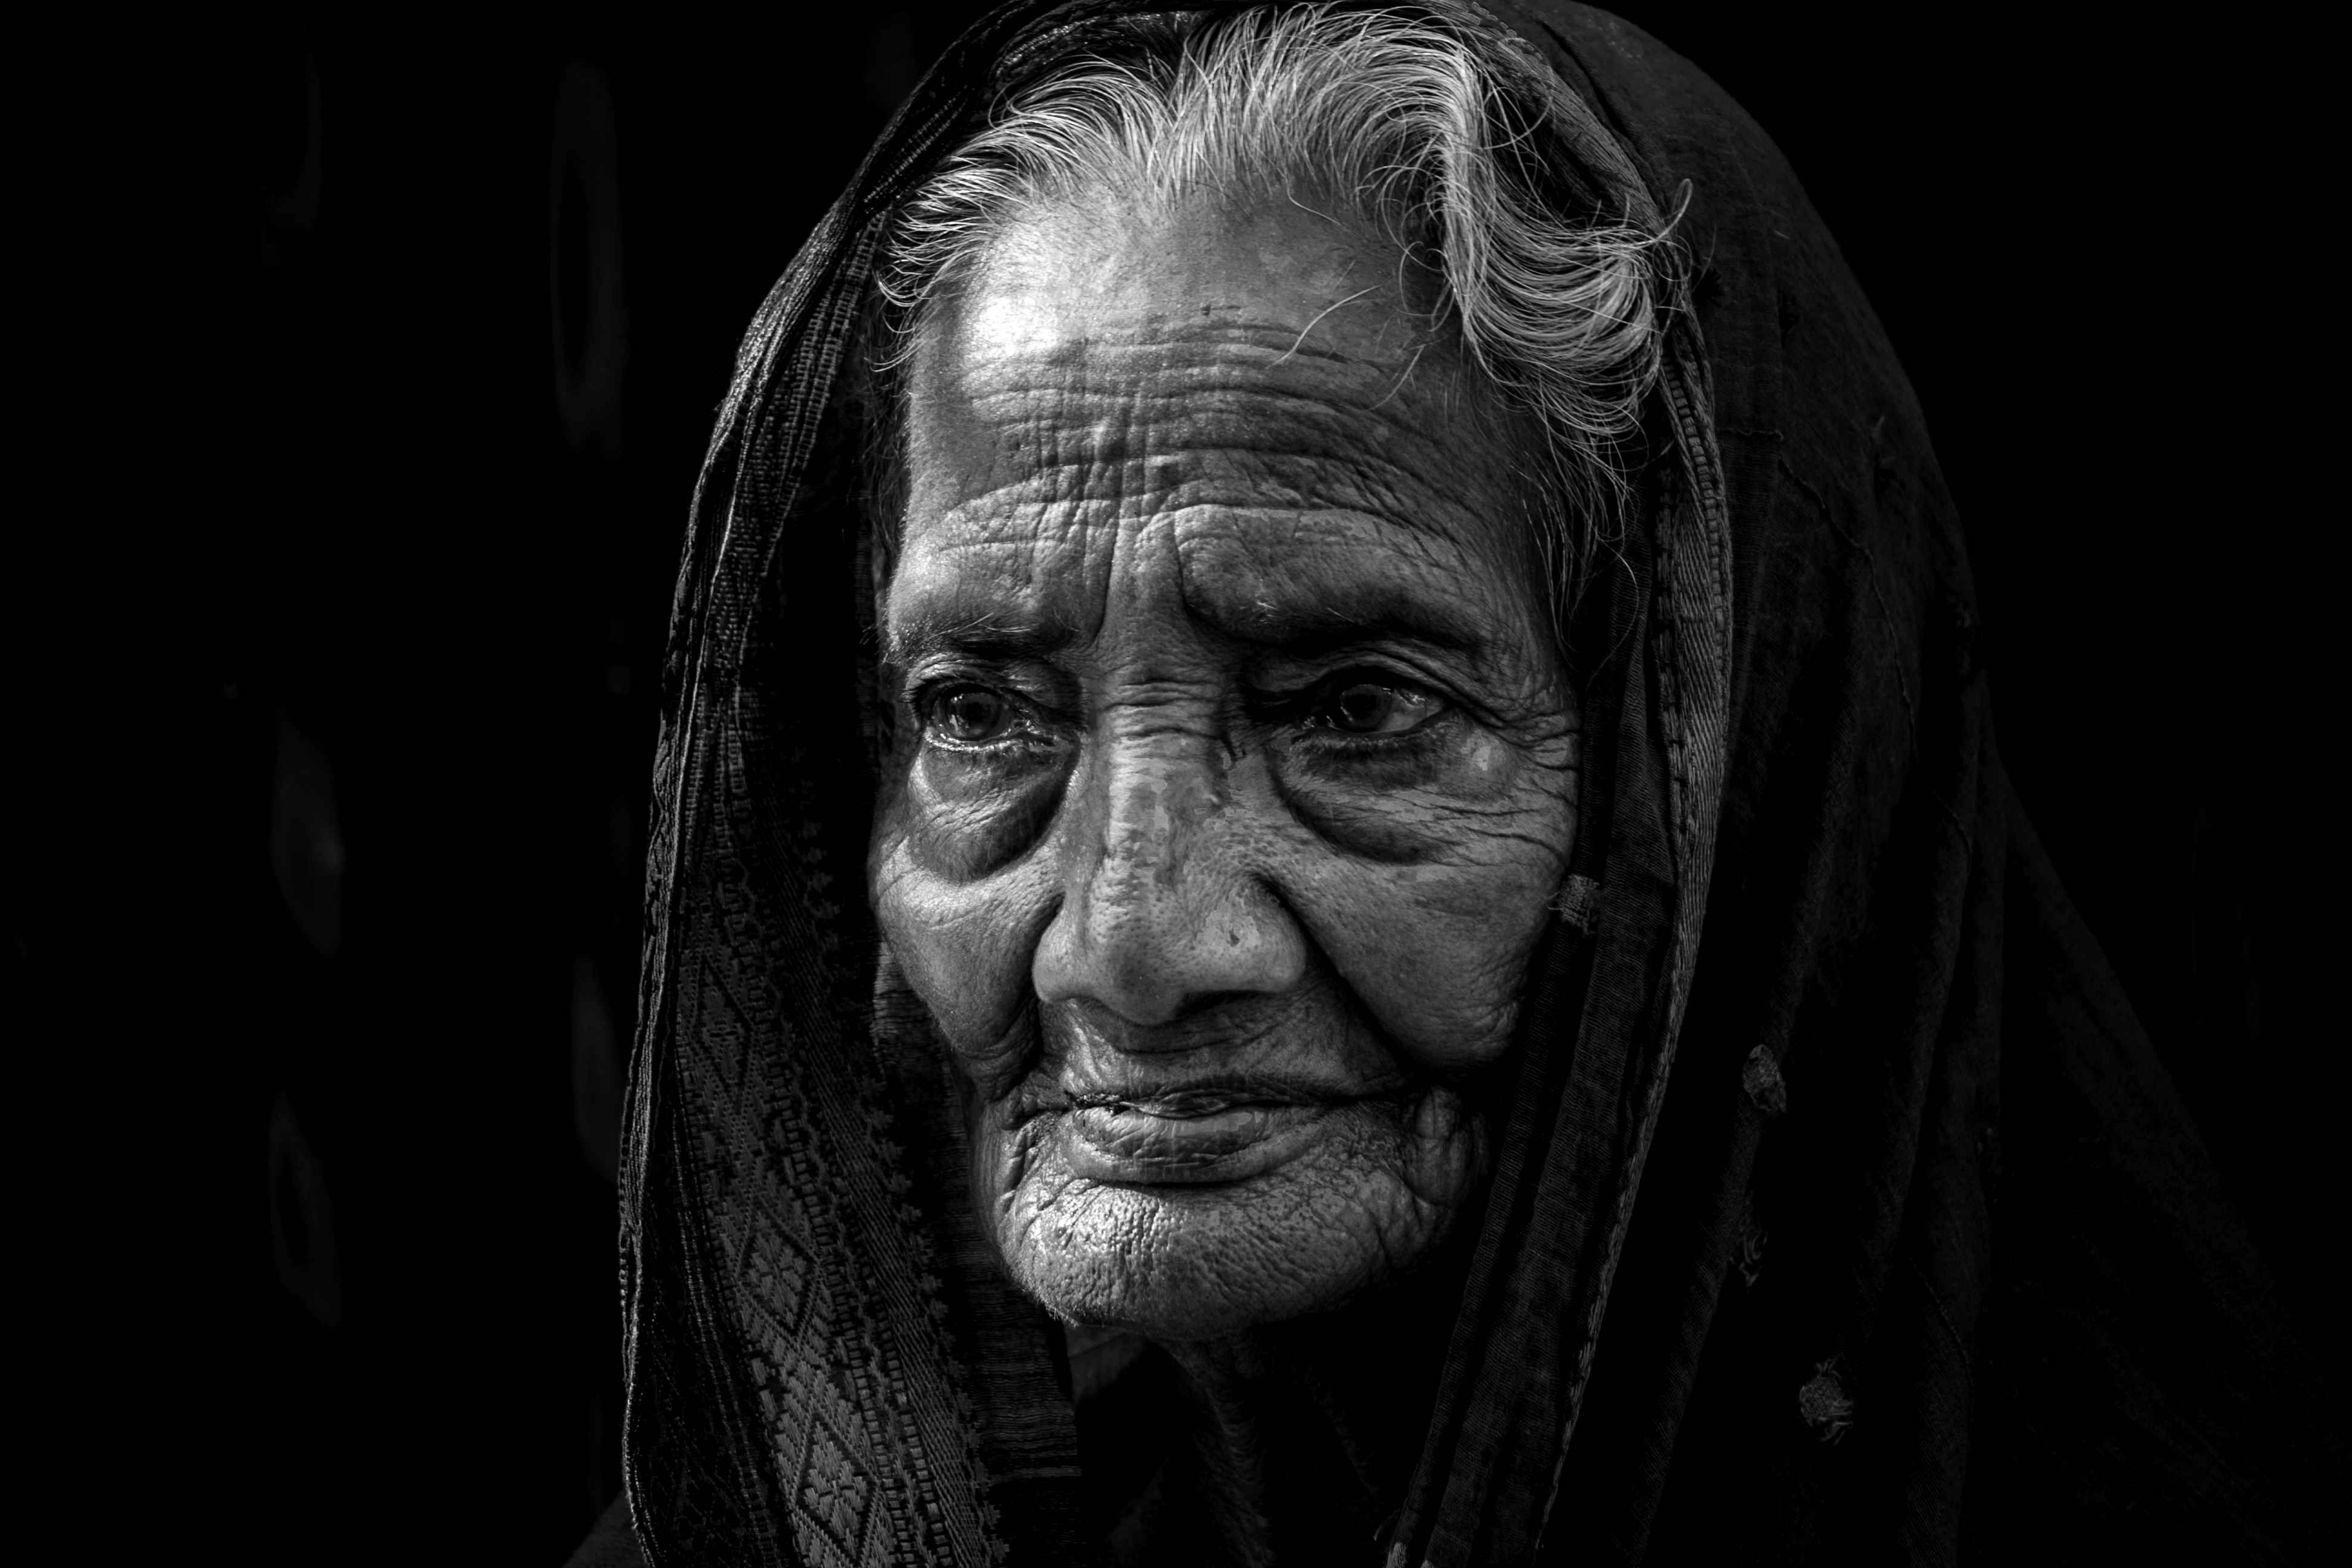 An old woman